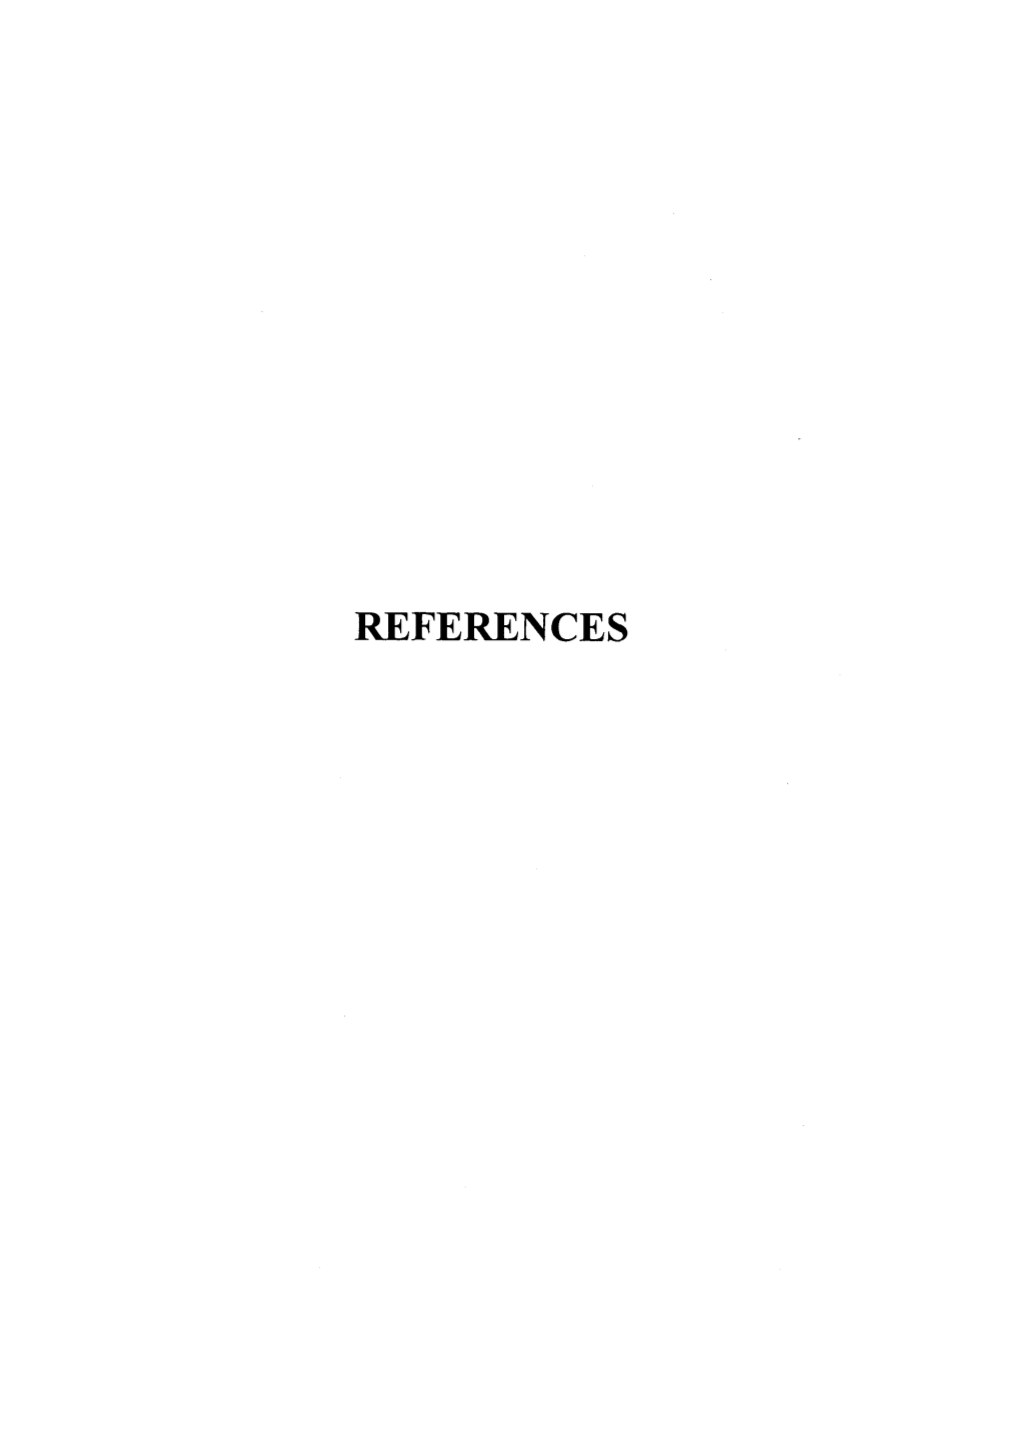 References References